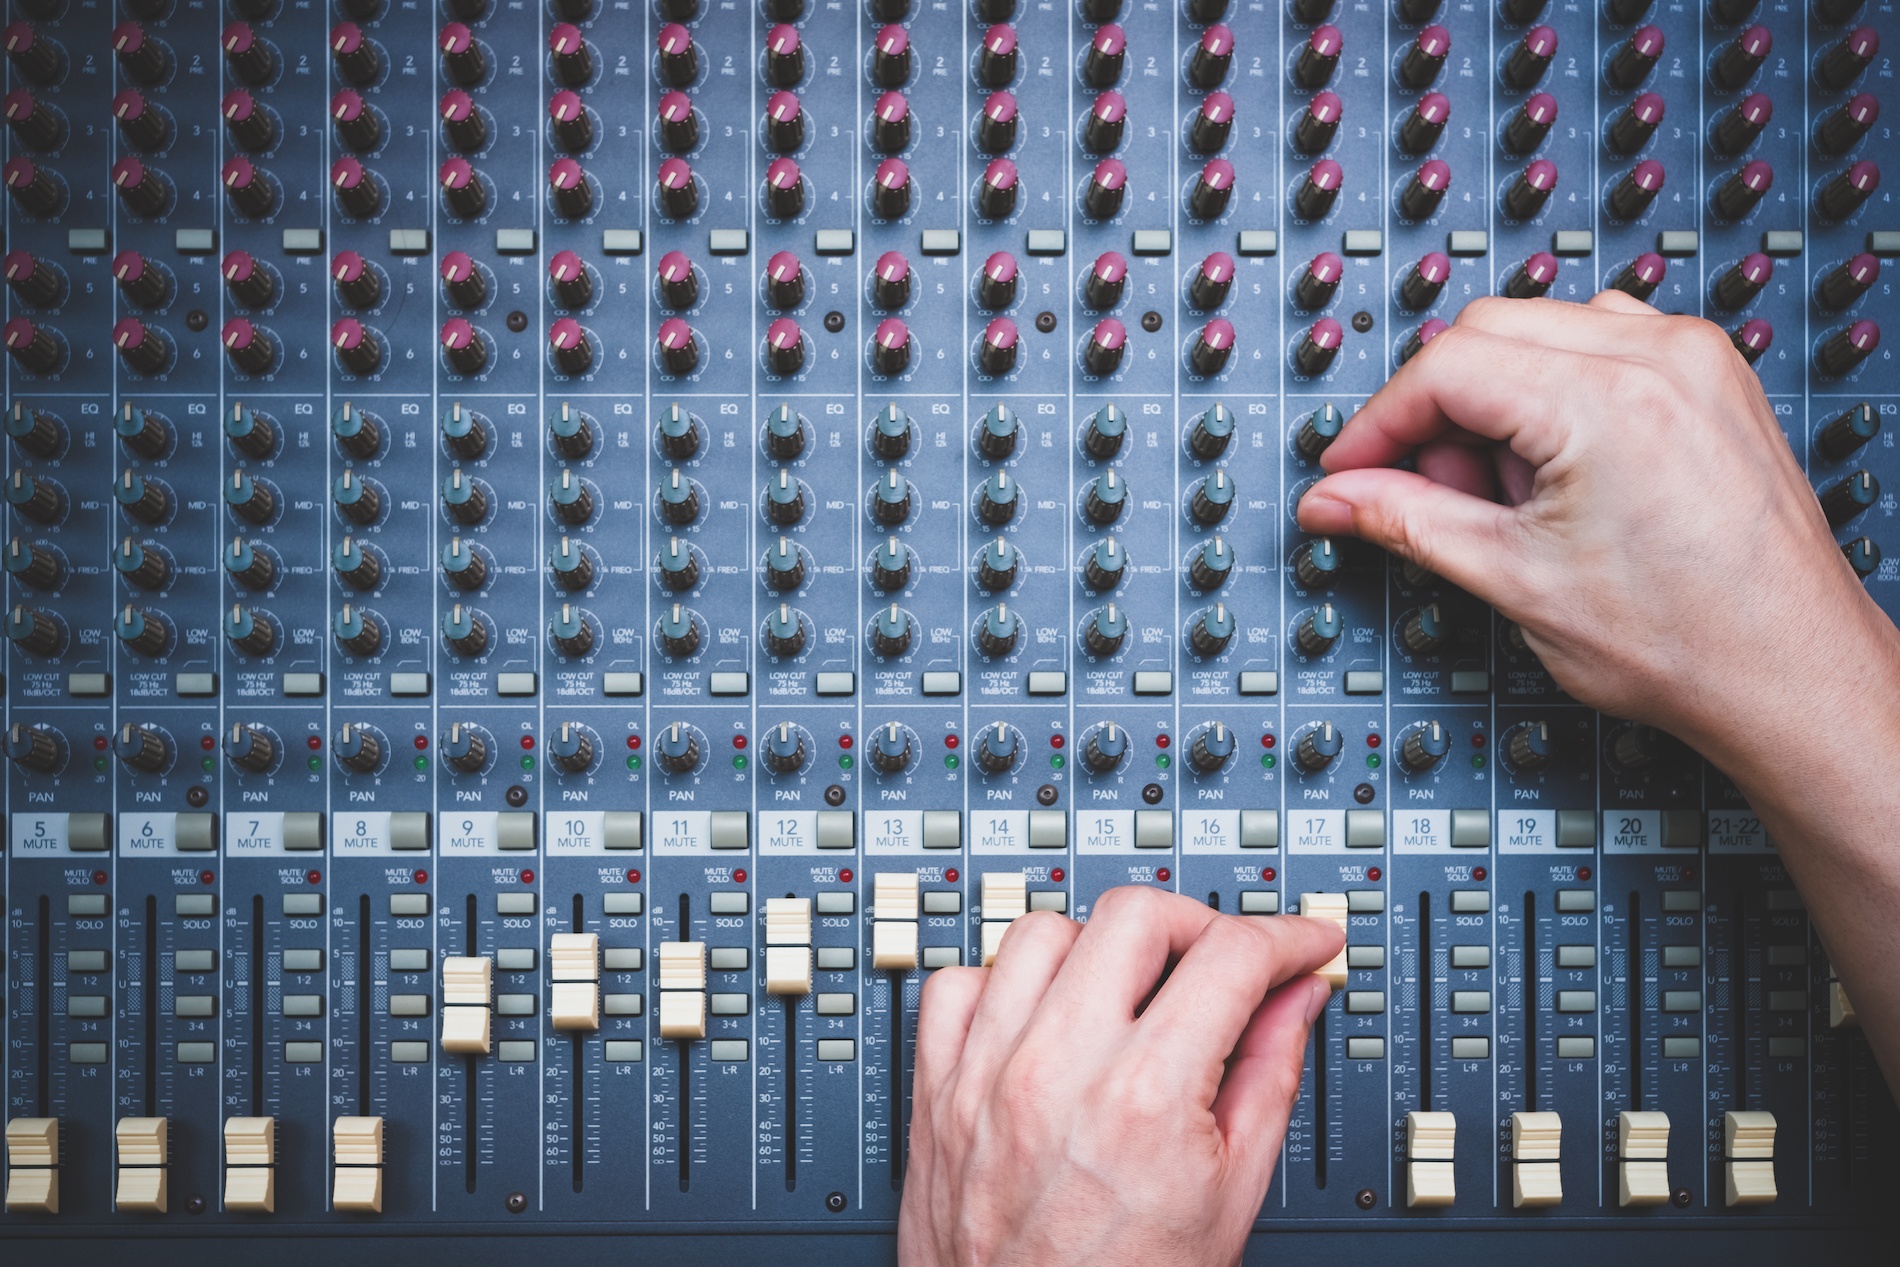 Sound mixers buying guide